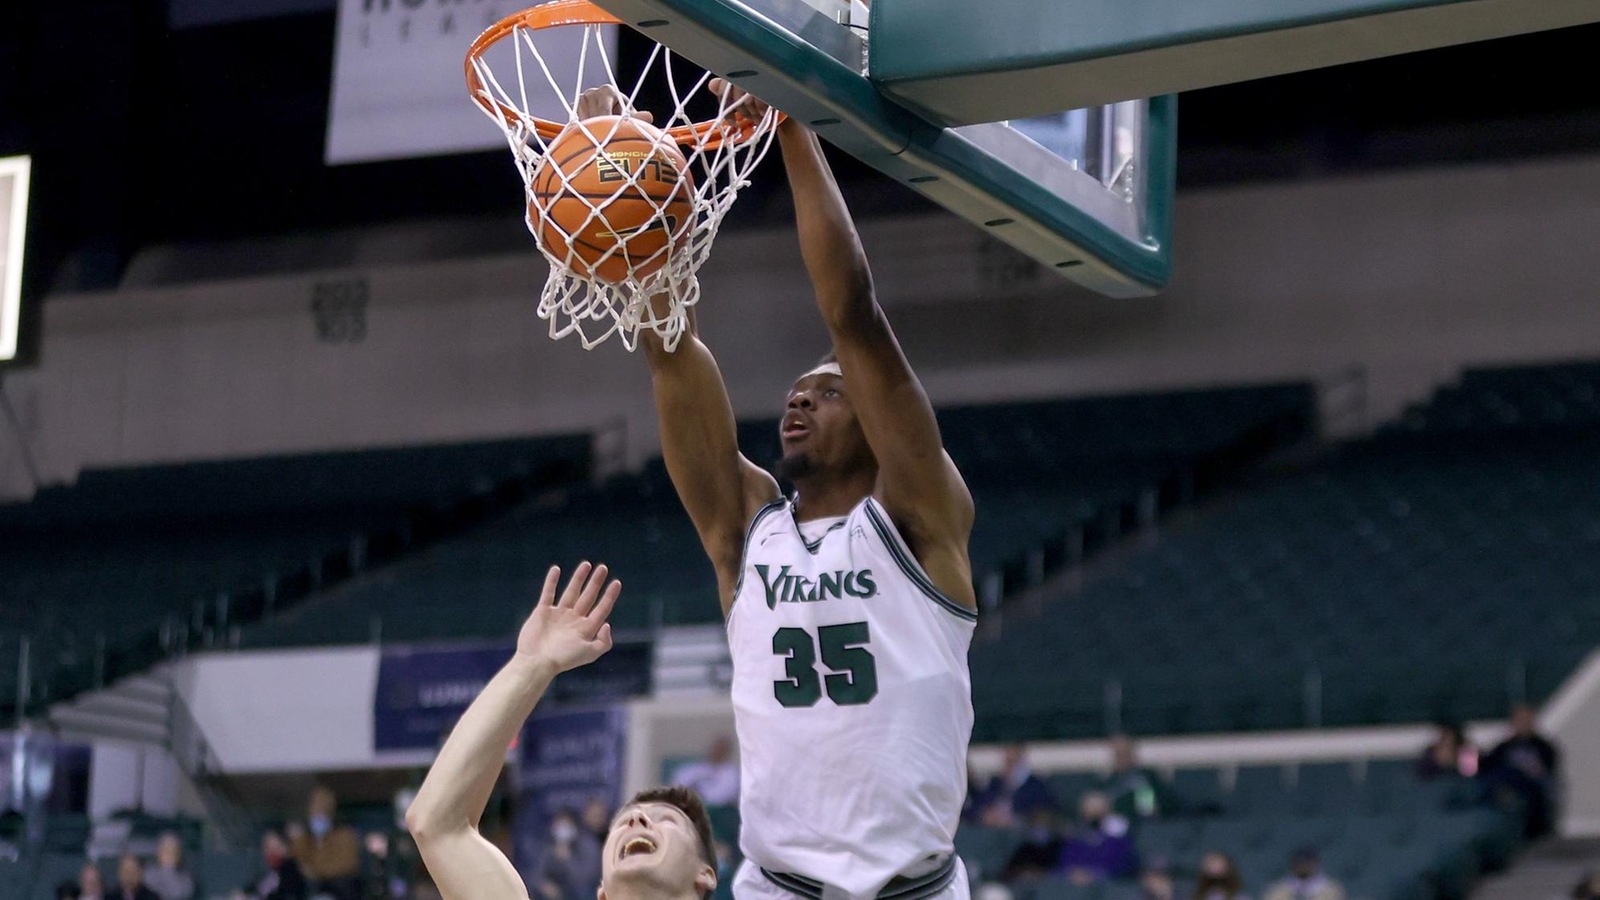 Cleveland State Men’s Basketball Earns 85-69 Victory Over Green Bay